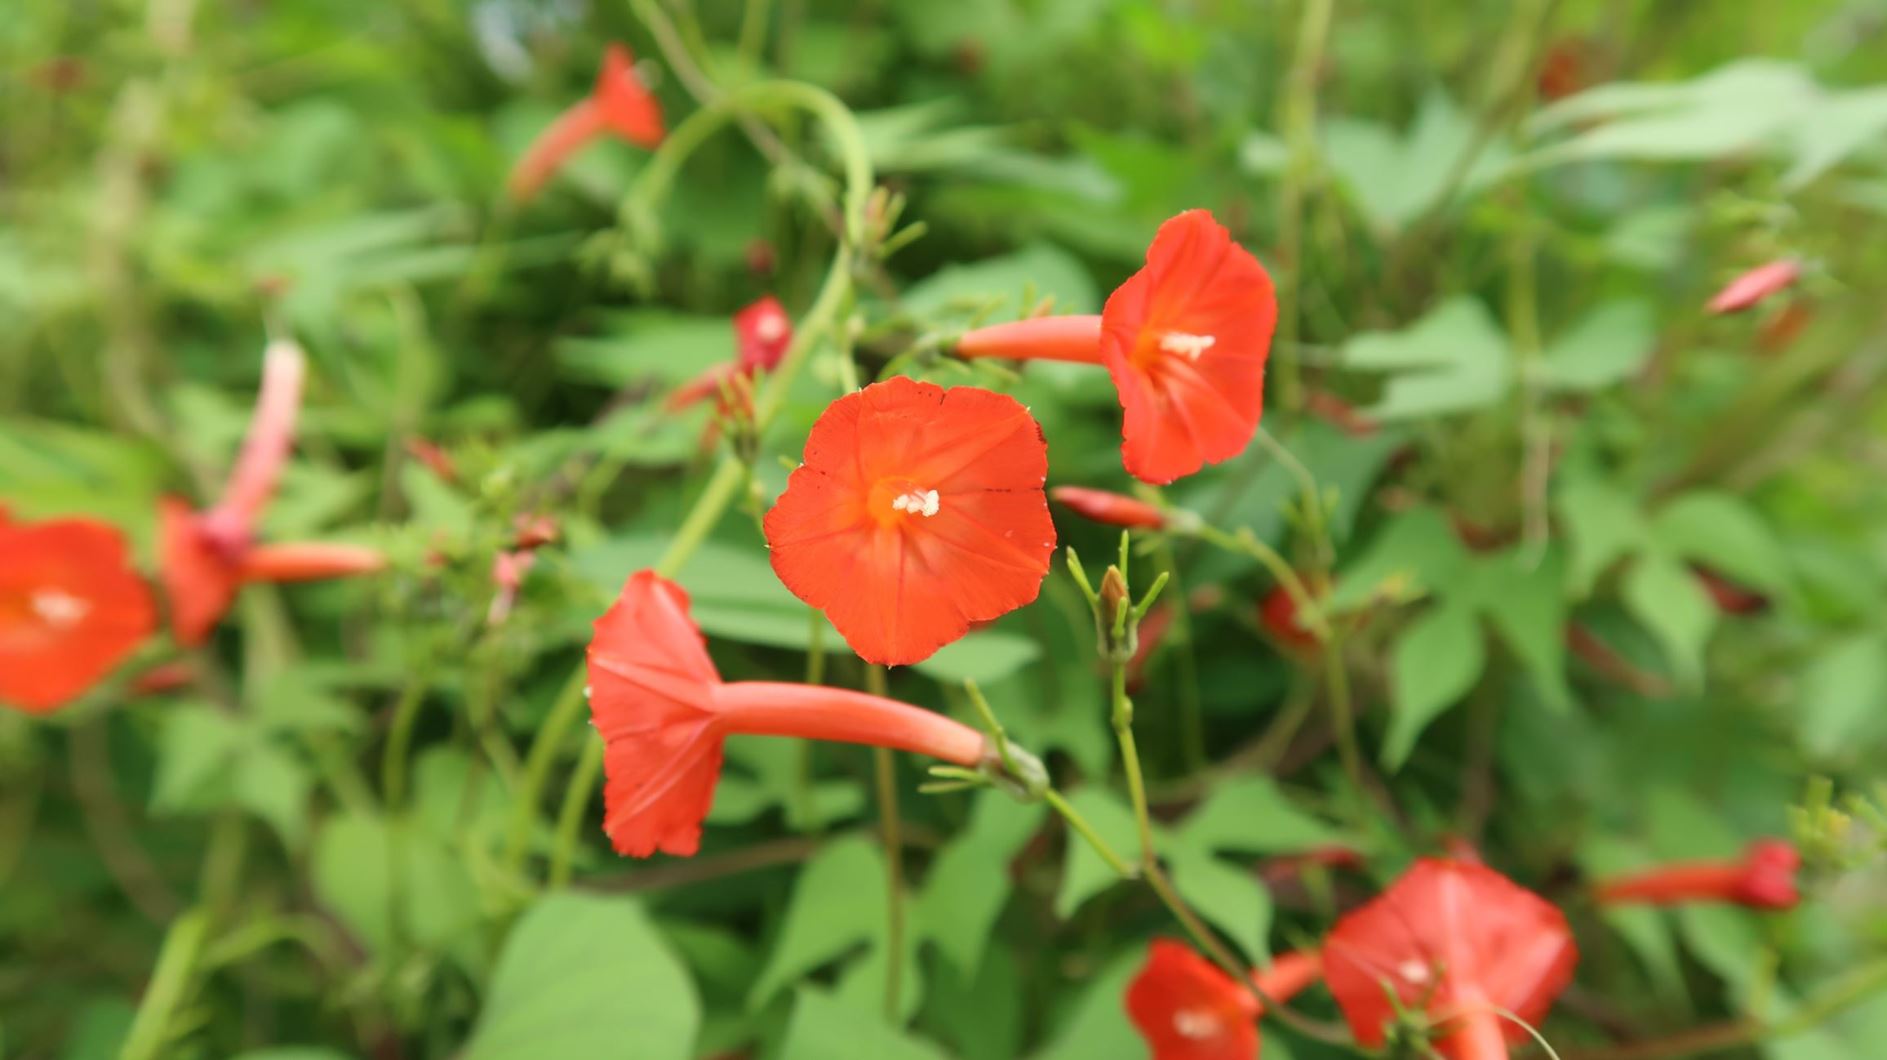 Ipomoea coccinea - Sternwinde, red morning glory, scarlet starglory